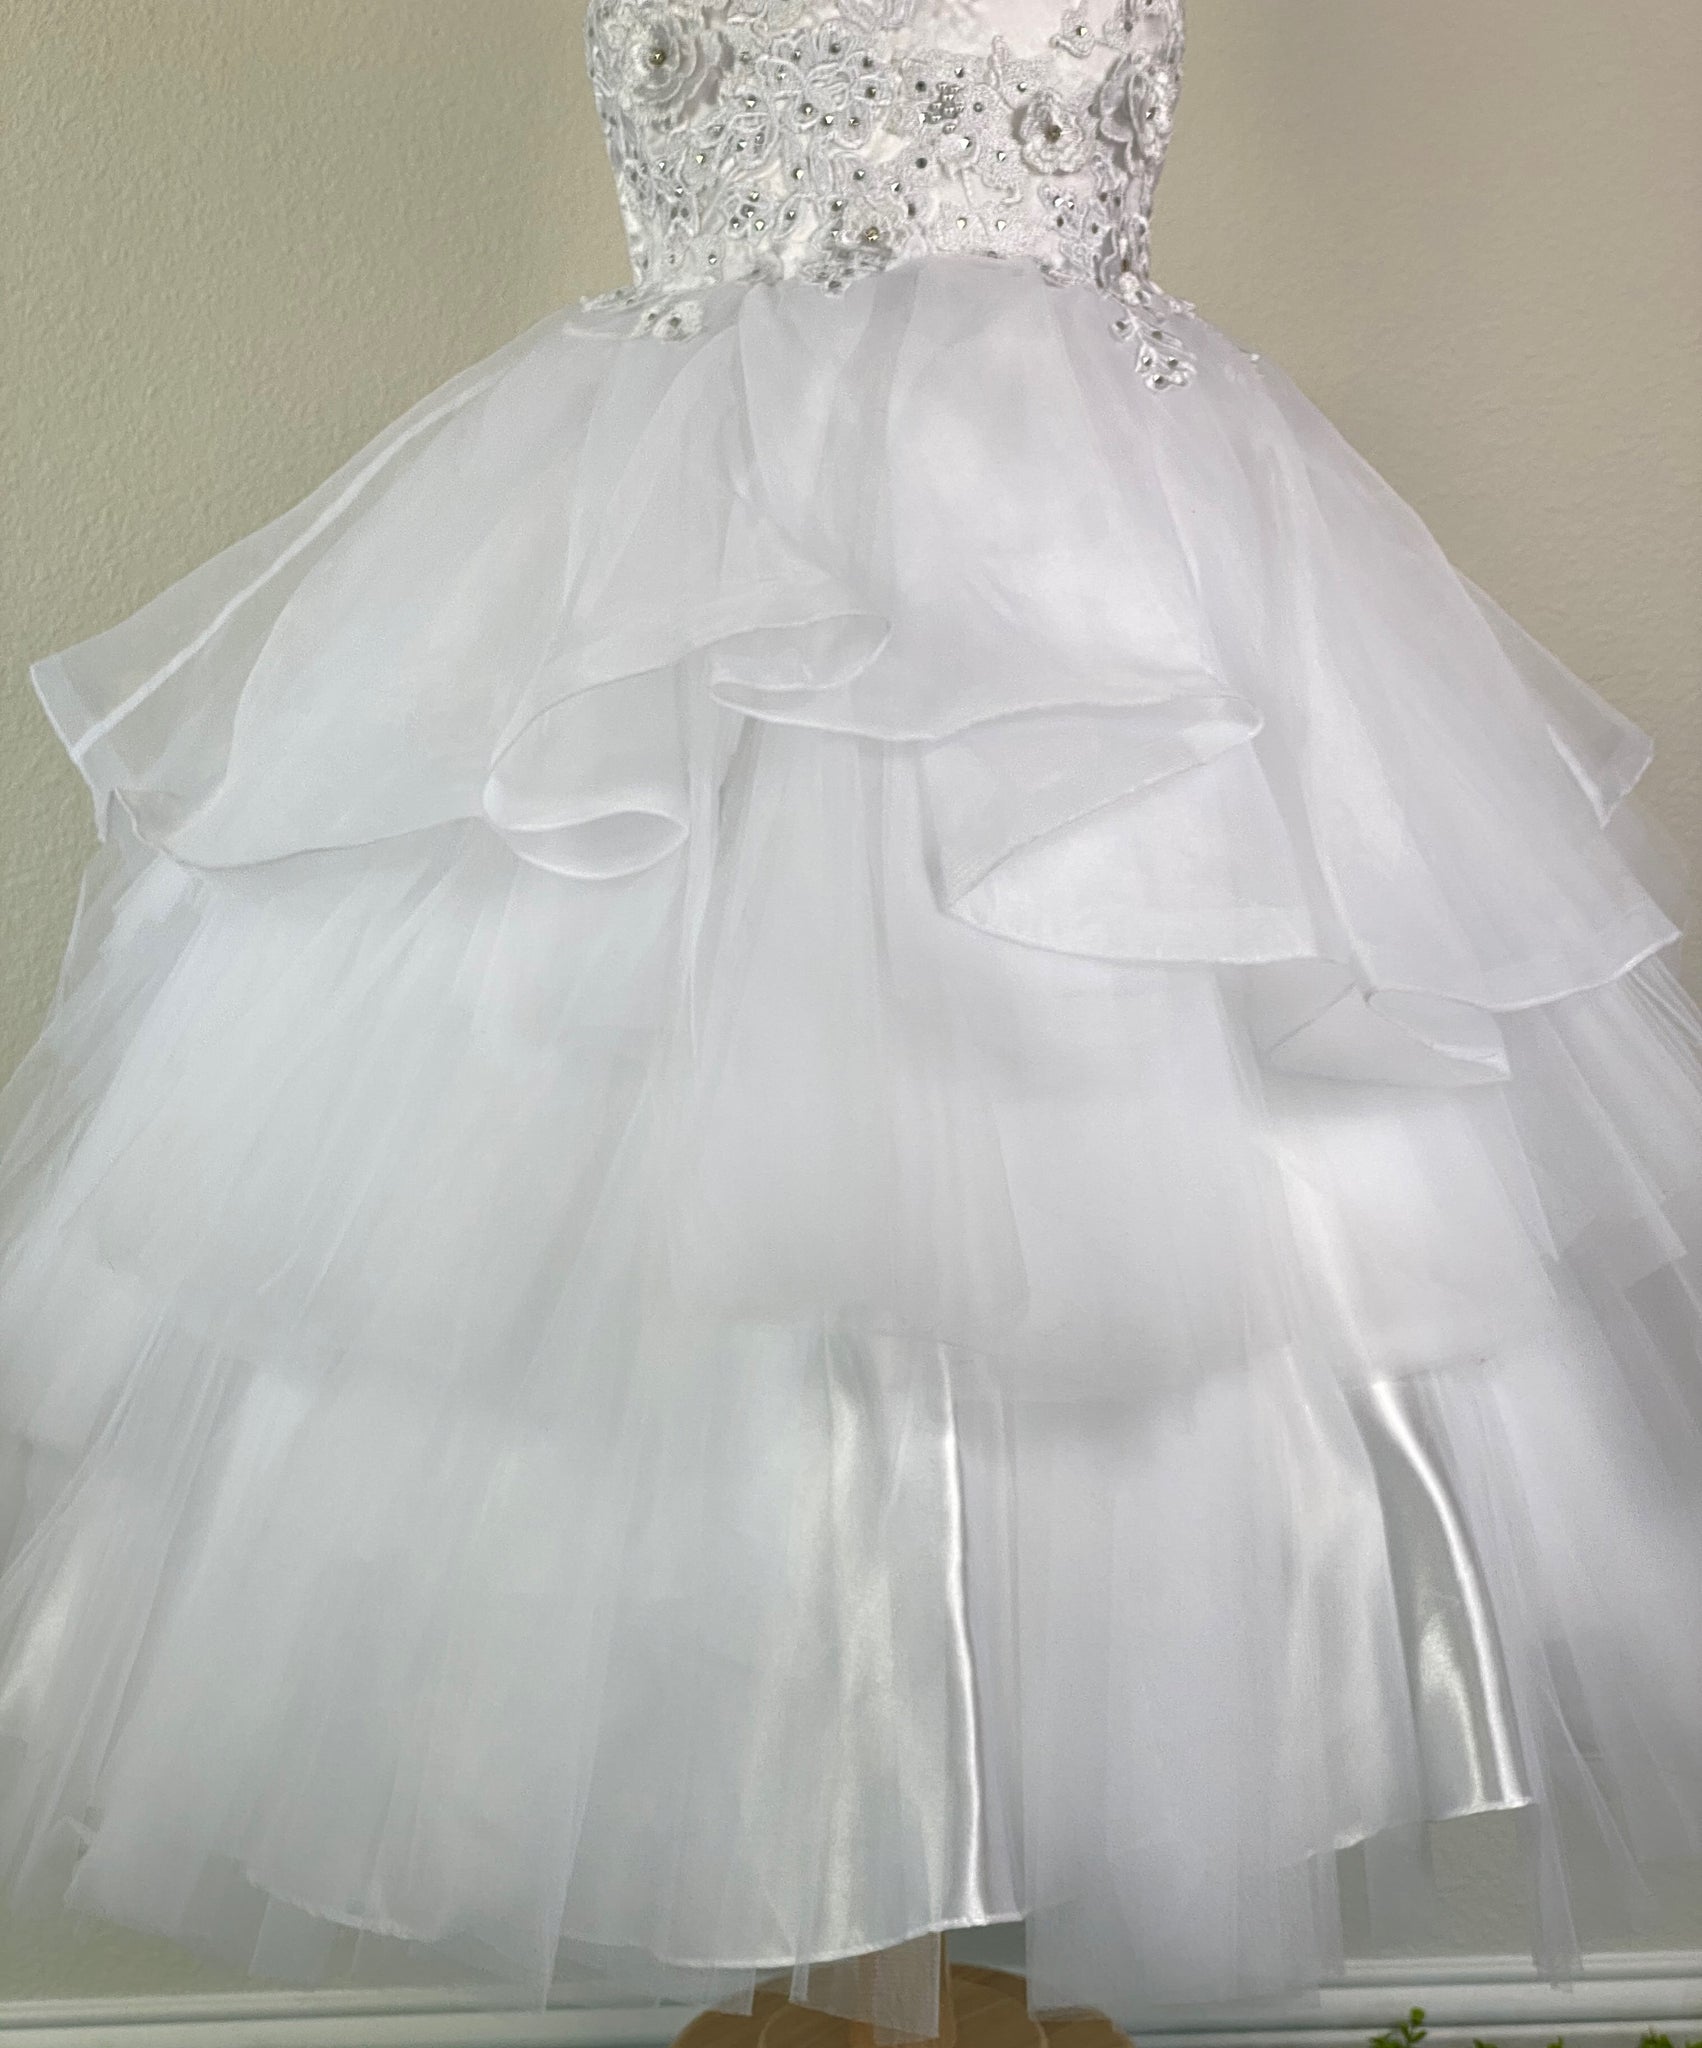 White, size 8 Embroidered Tulle over satin bodice with flowers and crystals throughout Layered ruffled mesh skirt over satin underlay Zipper closure Satin ribbon for bow